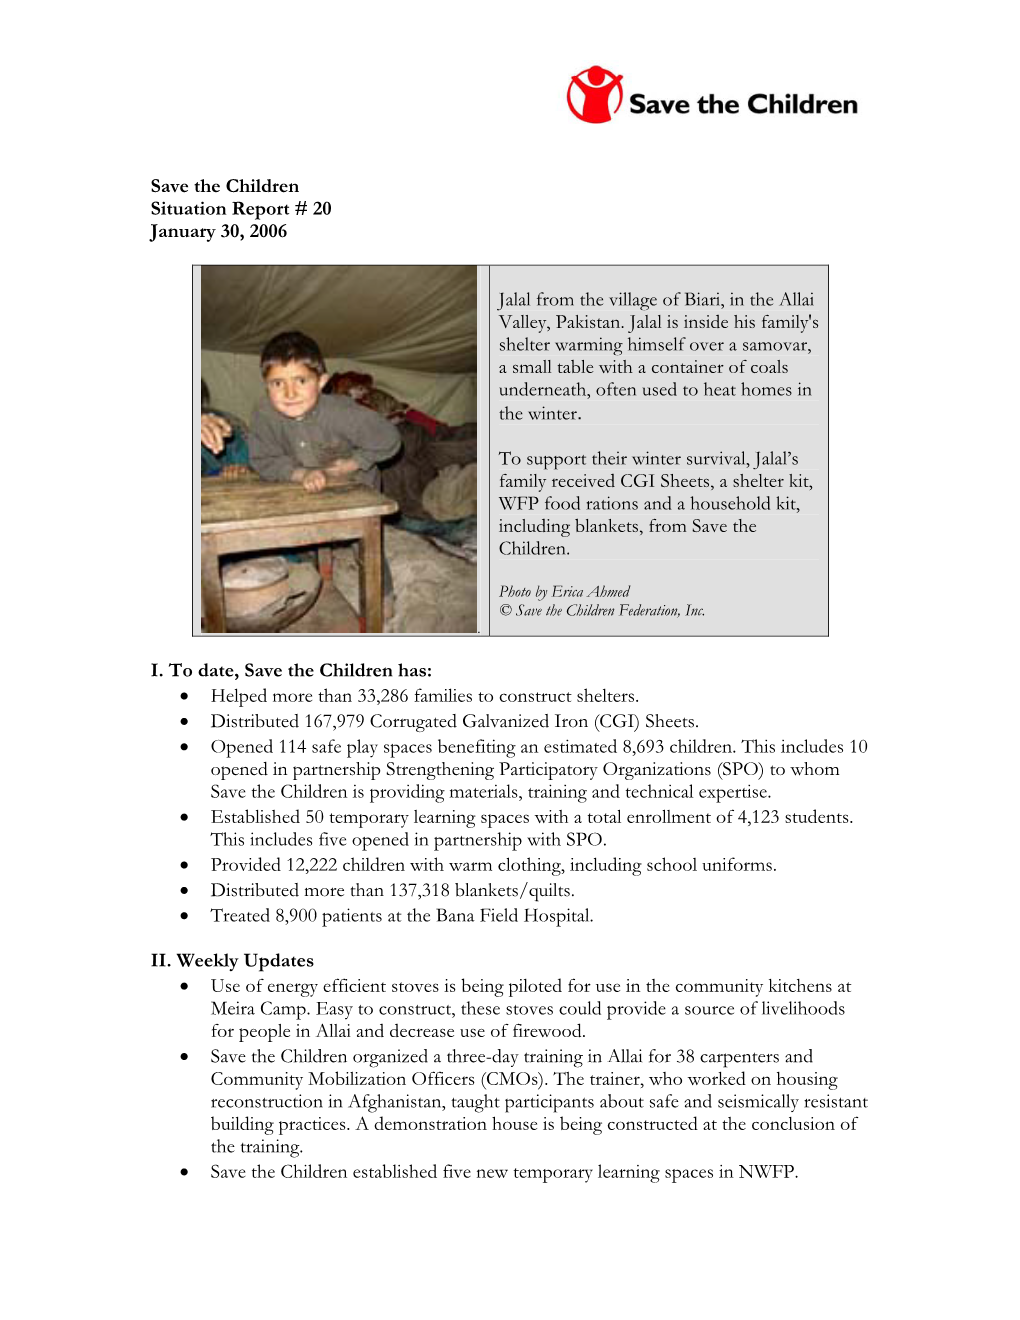 Save the Children Situation Report # 20 January 30, 2006 Jalal from The